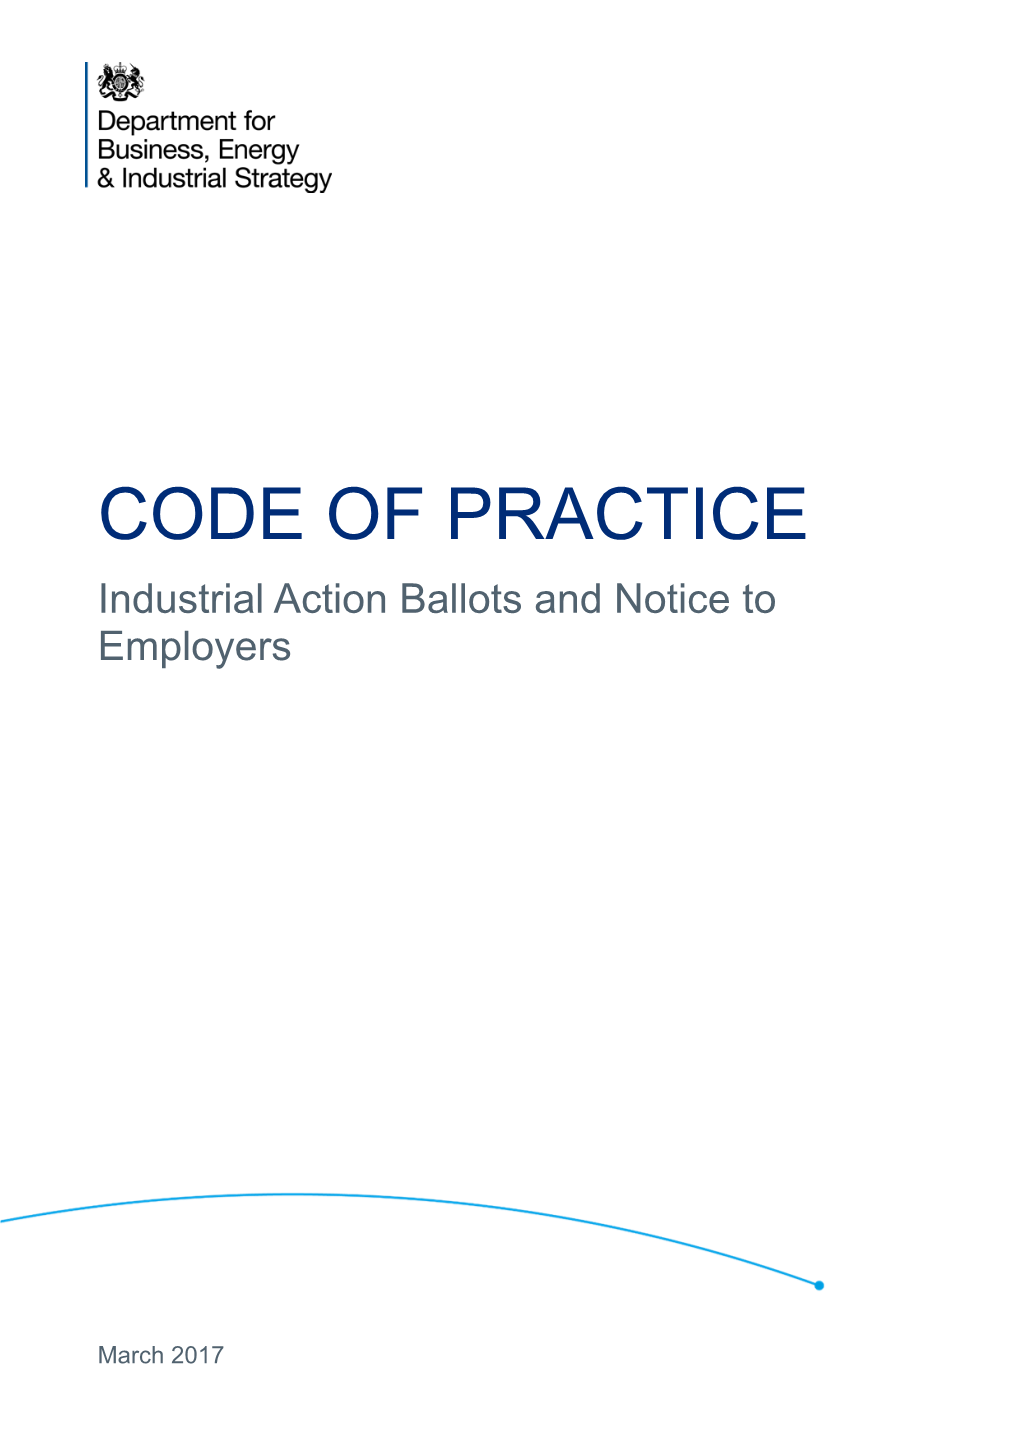 Code of Practice on Industrial Action Ballots and Notice to Employers